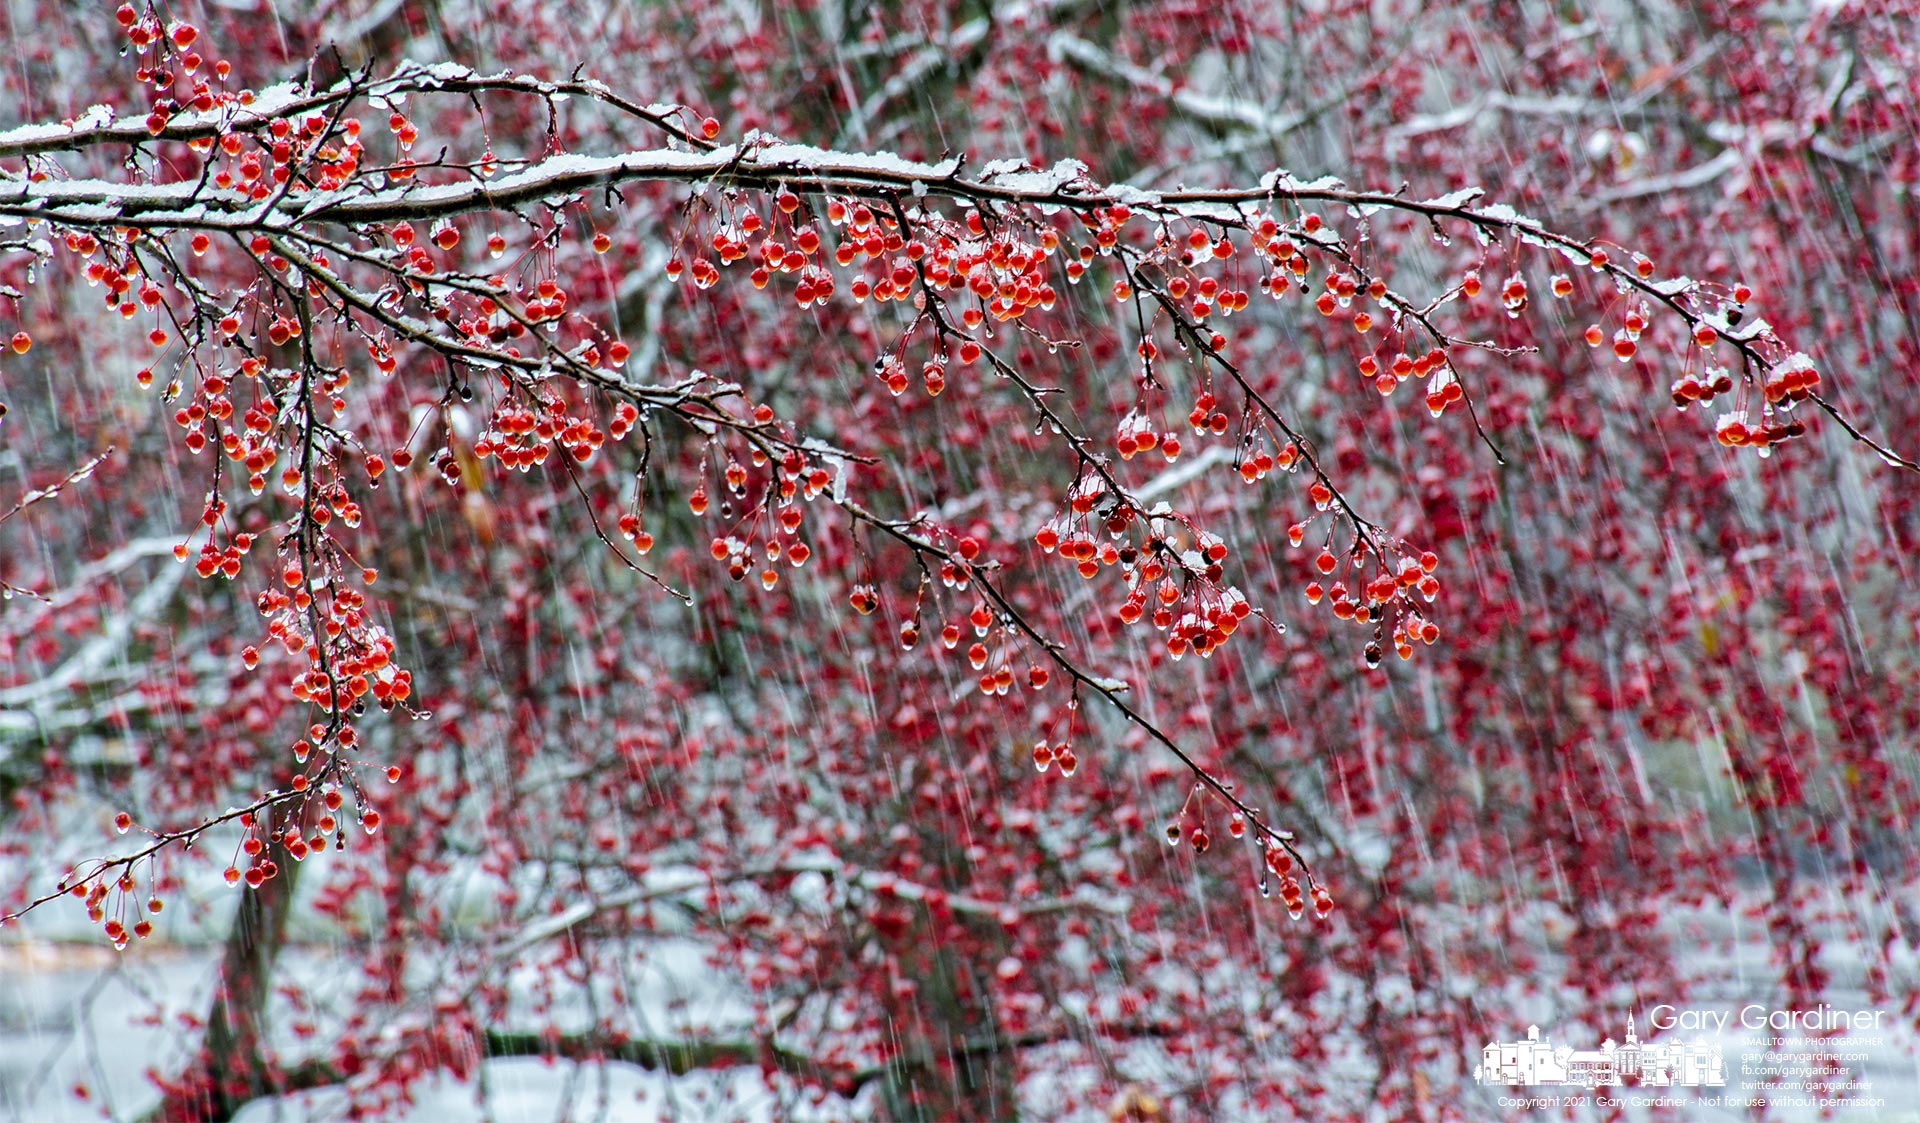 Snow falls and settles on crabapples bourne on bare branches of trees dotting the perimeter of open fields at Alum Creek Park North. My Final Photo for Nov. 14, 2021.